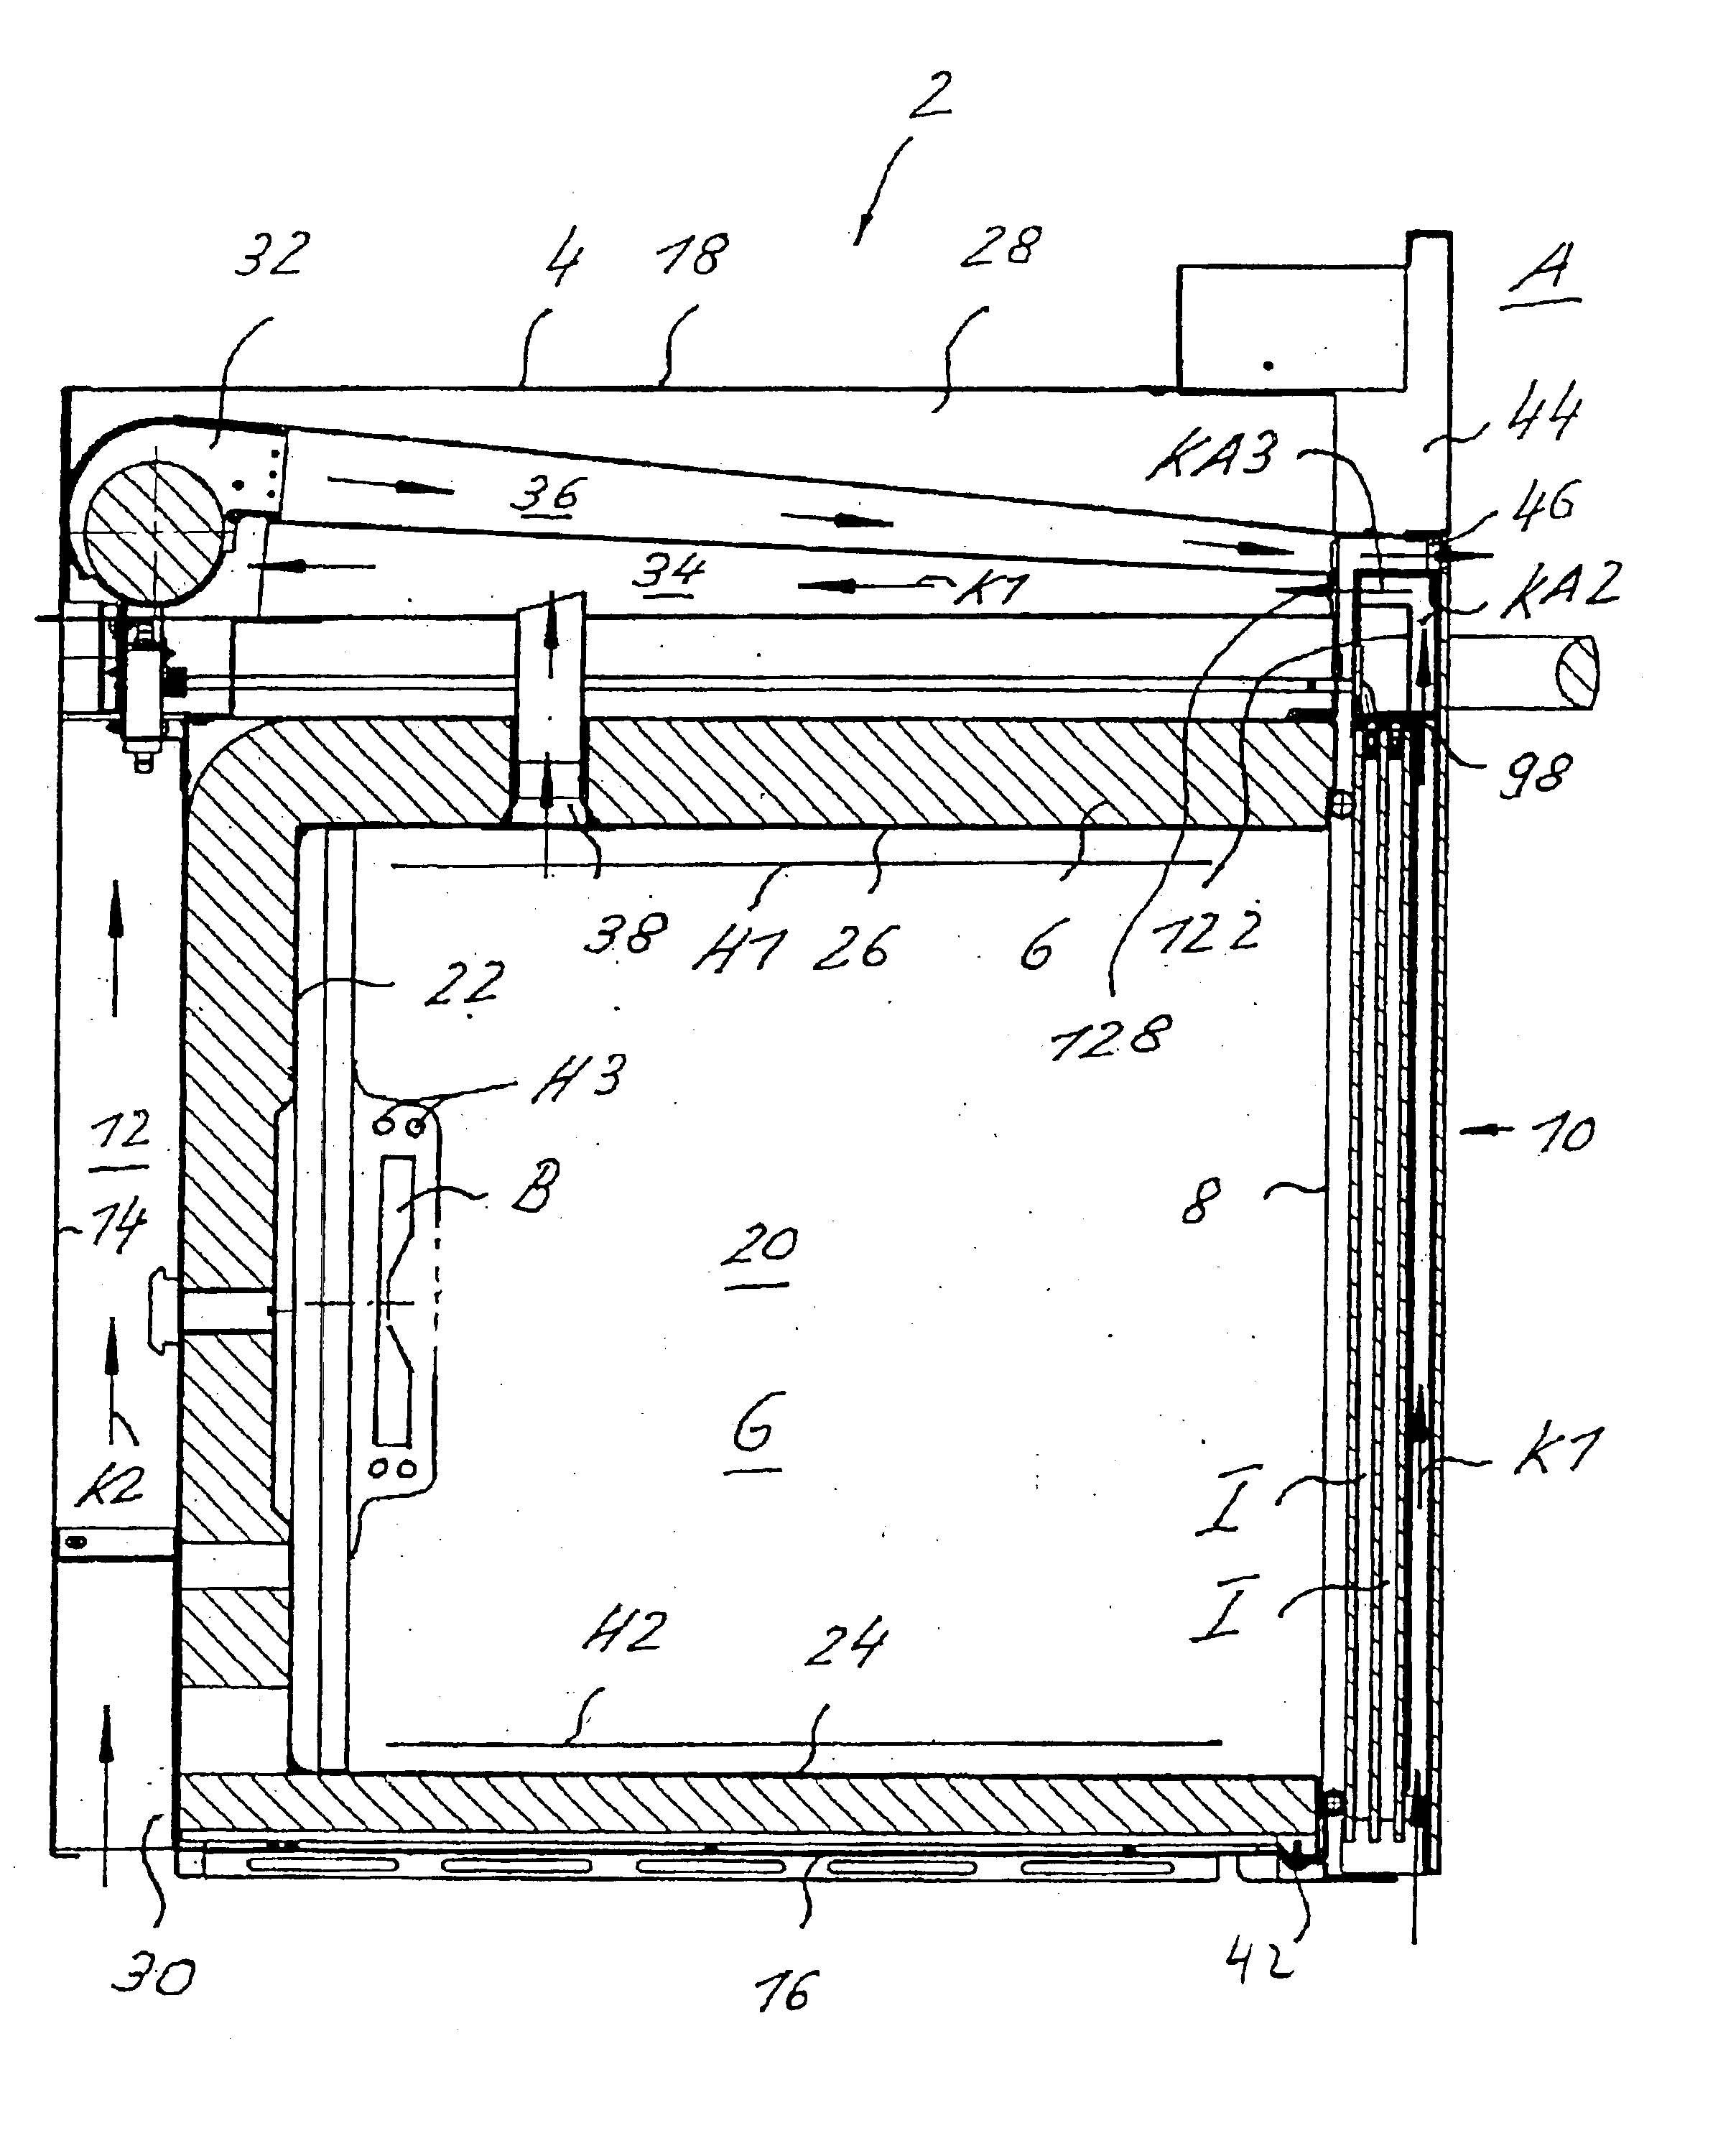 Cooking oven with a cooled door that permits pyrolysis